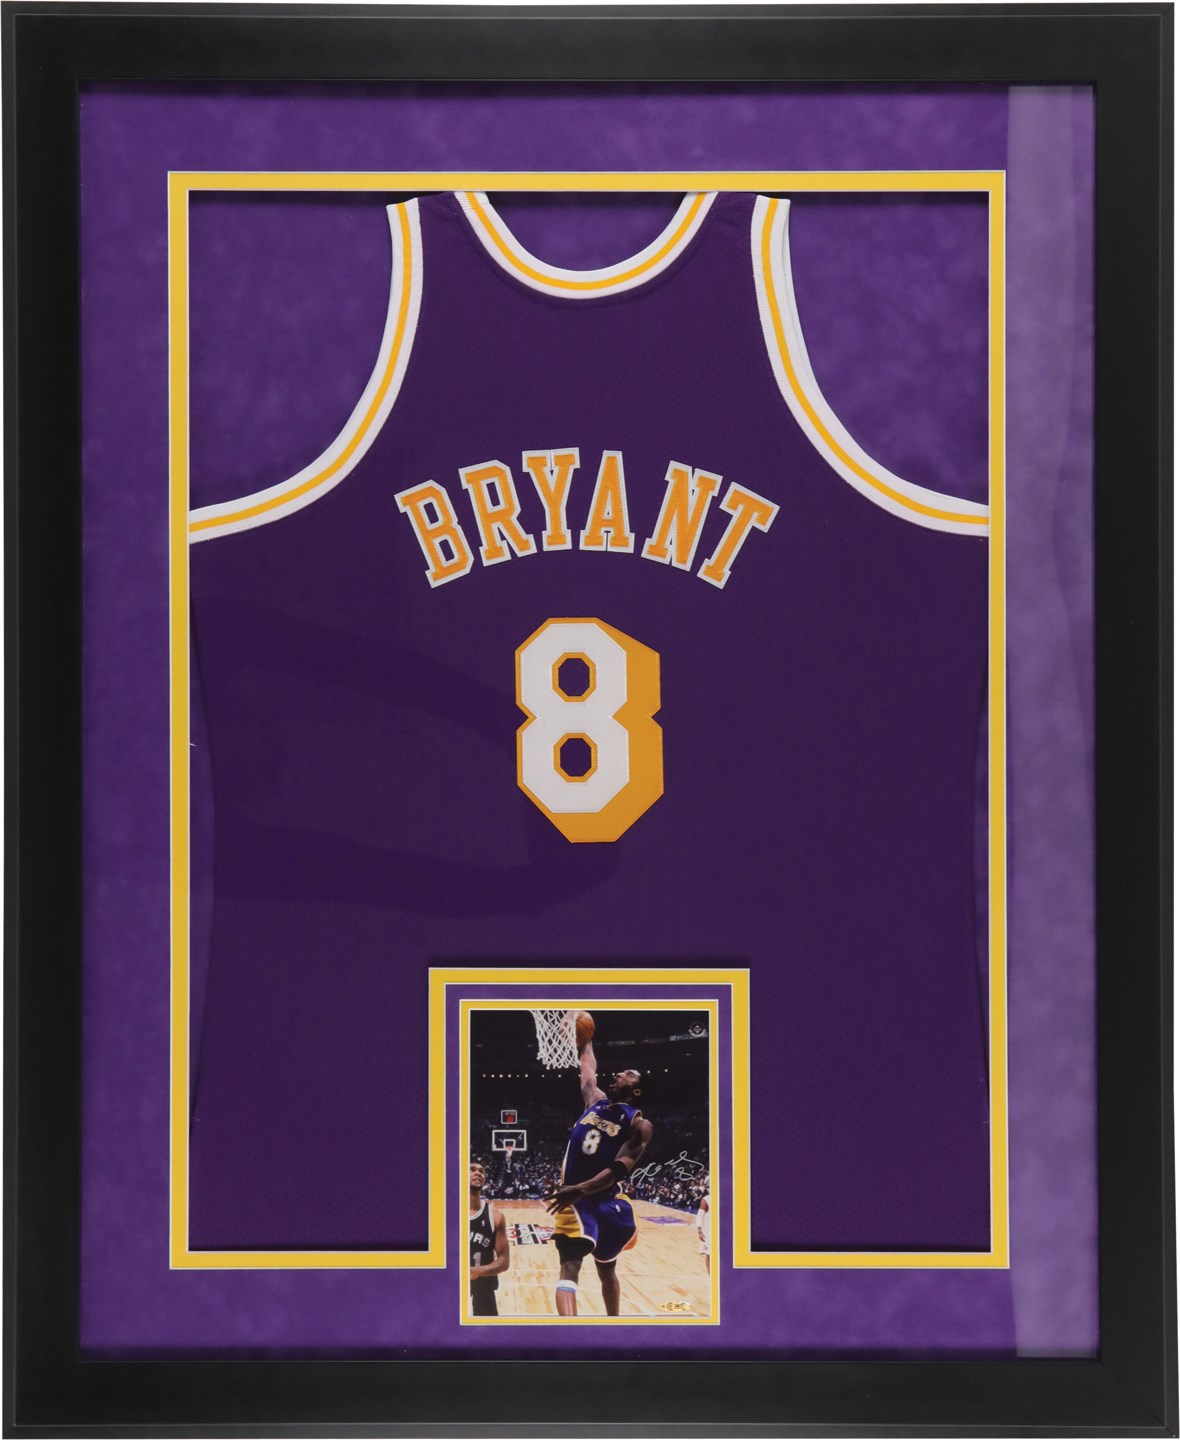 - Kobe Bryant Signed Photograph with Lakers Jersey Display (UDA)